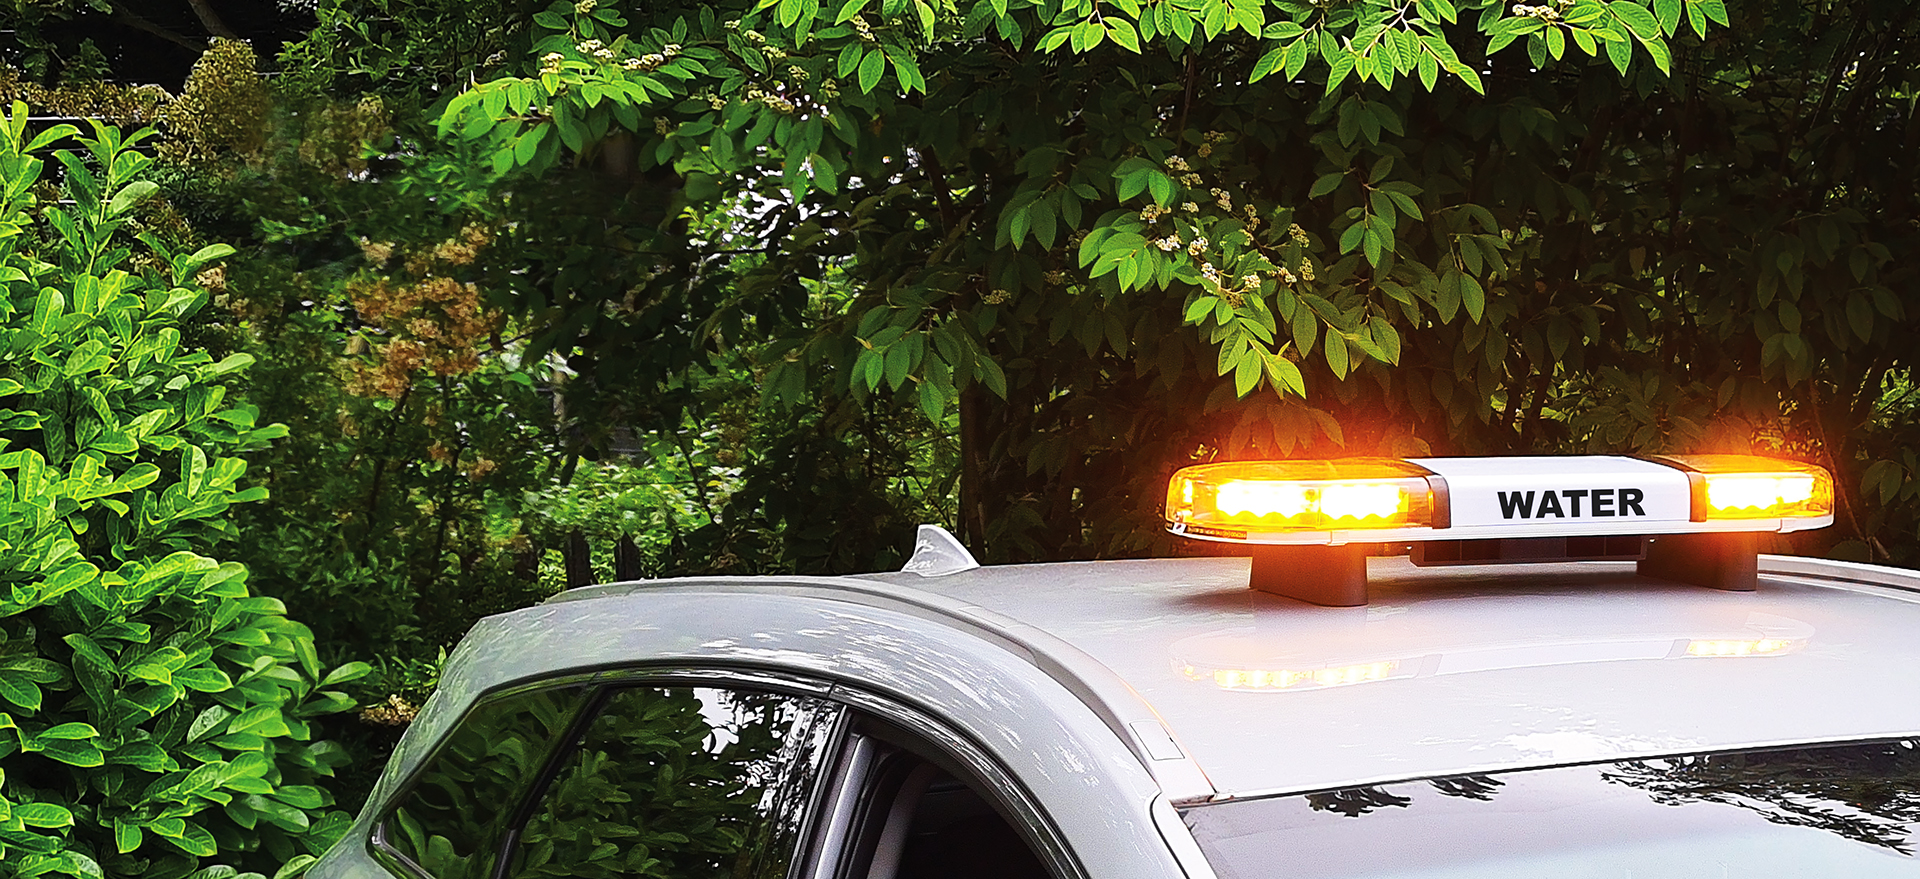 Closely Cropped Angled Shot of Amber Lightbar with Water Livery on Top of Silver Vehicle Roof in Front of Foliage